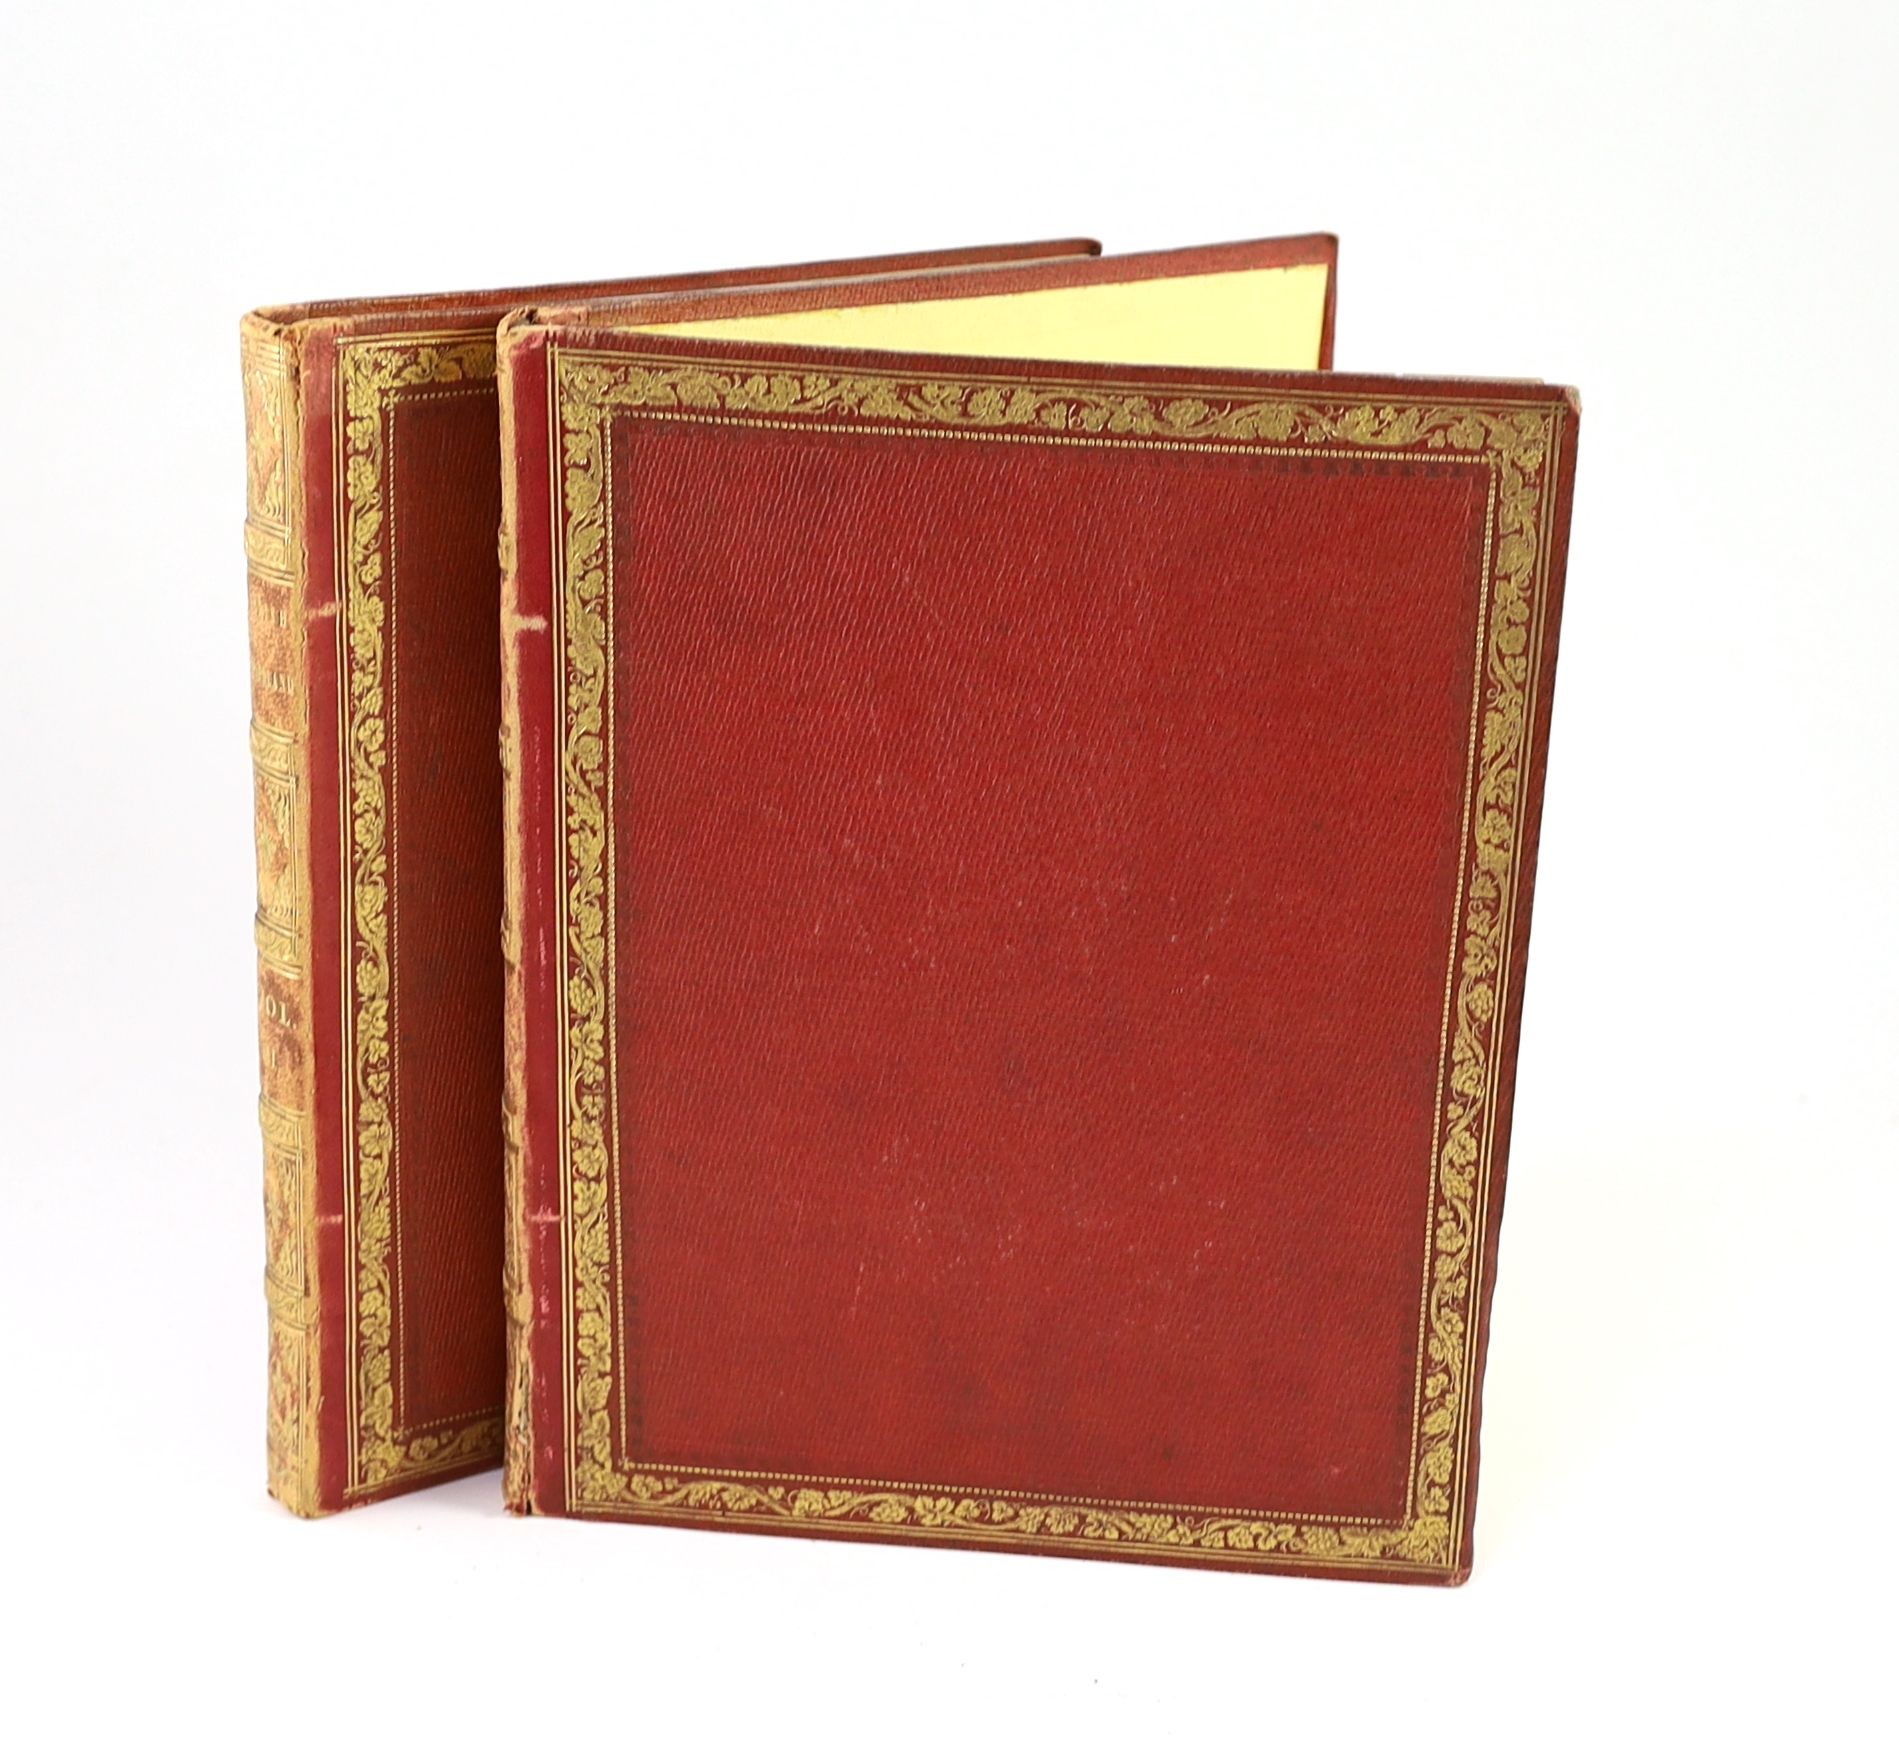 Rose, Thomas, Topographer - The British Switzerland, or, Picturesque Rambles in the Lake Dustrict, illustrated by Thomas Allom and others, 2 vols, 4to, red cloth gilt, with 87 engraved plates and a folding map, London, [